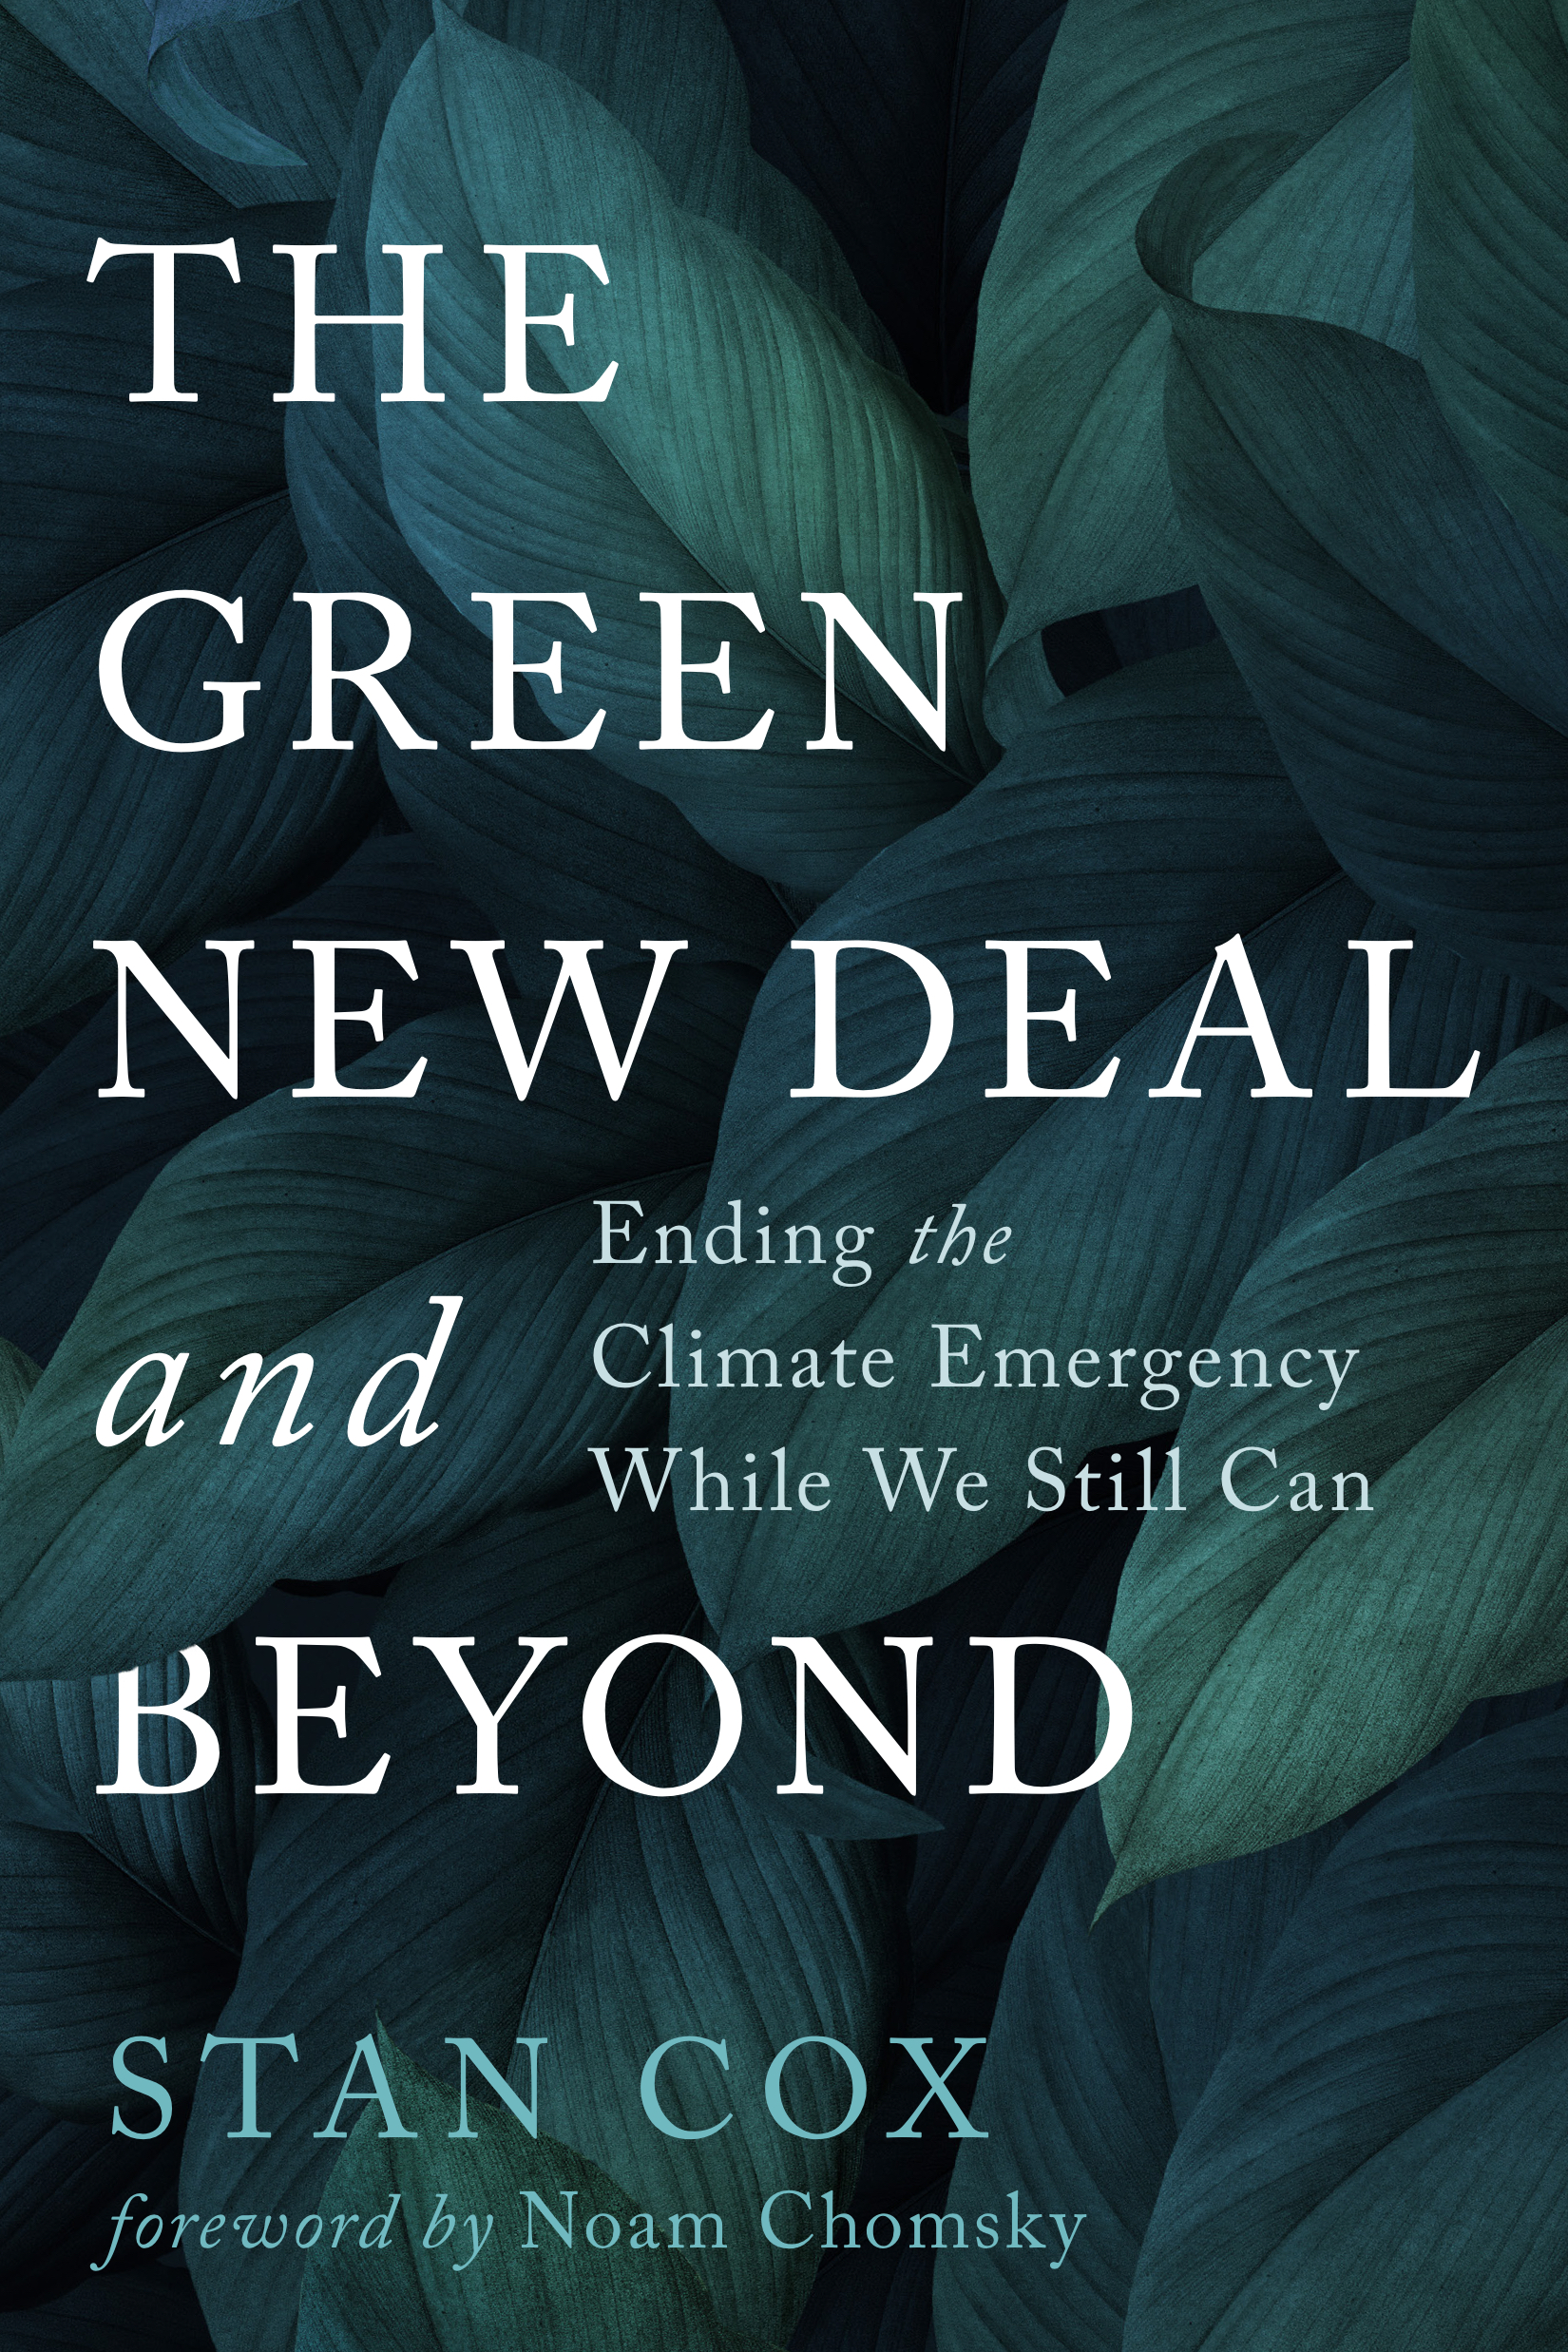 The Green New Deal and Beyond